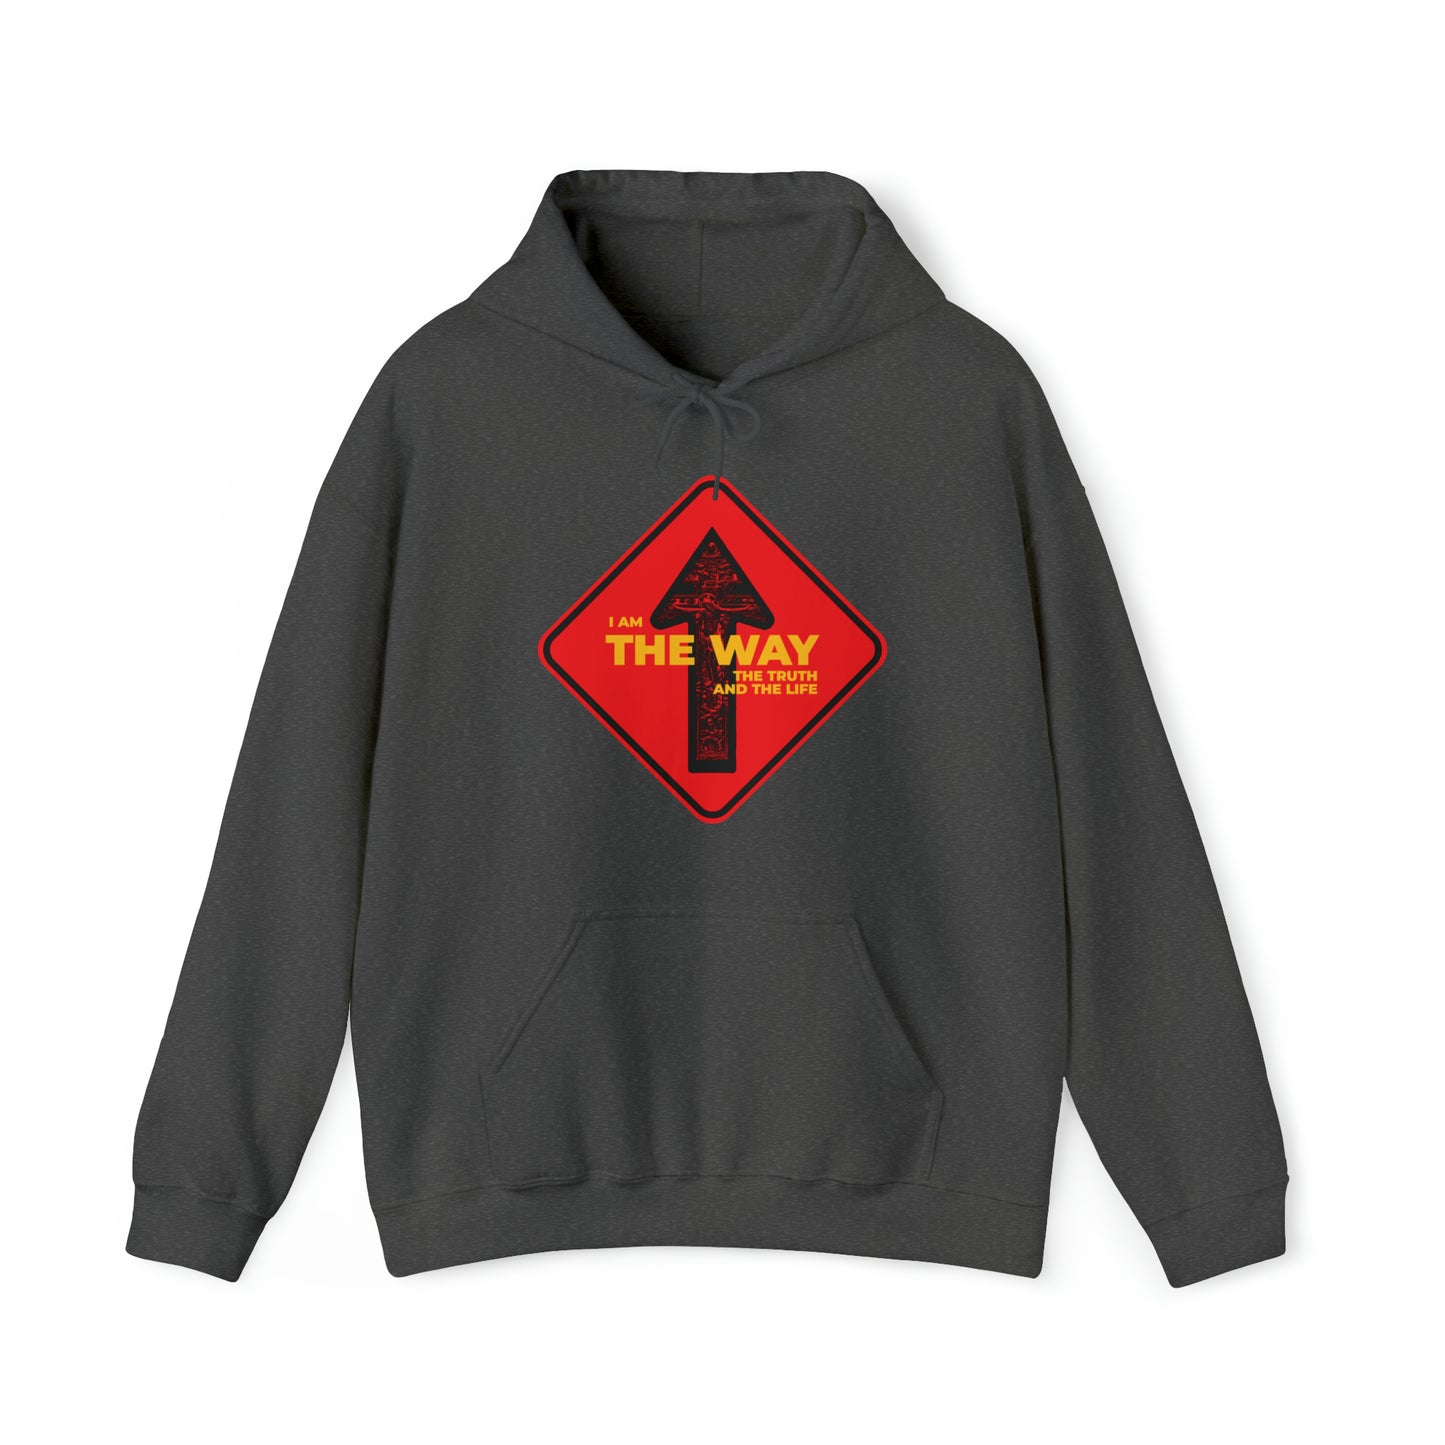 I Am the Way, the Truth and the Life No. 1 | Orthodox Christian Hoodie / Hooded Sweatshirt